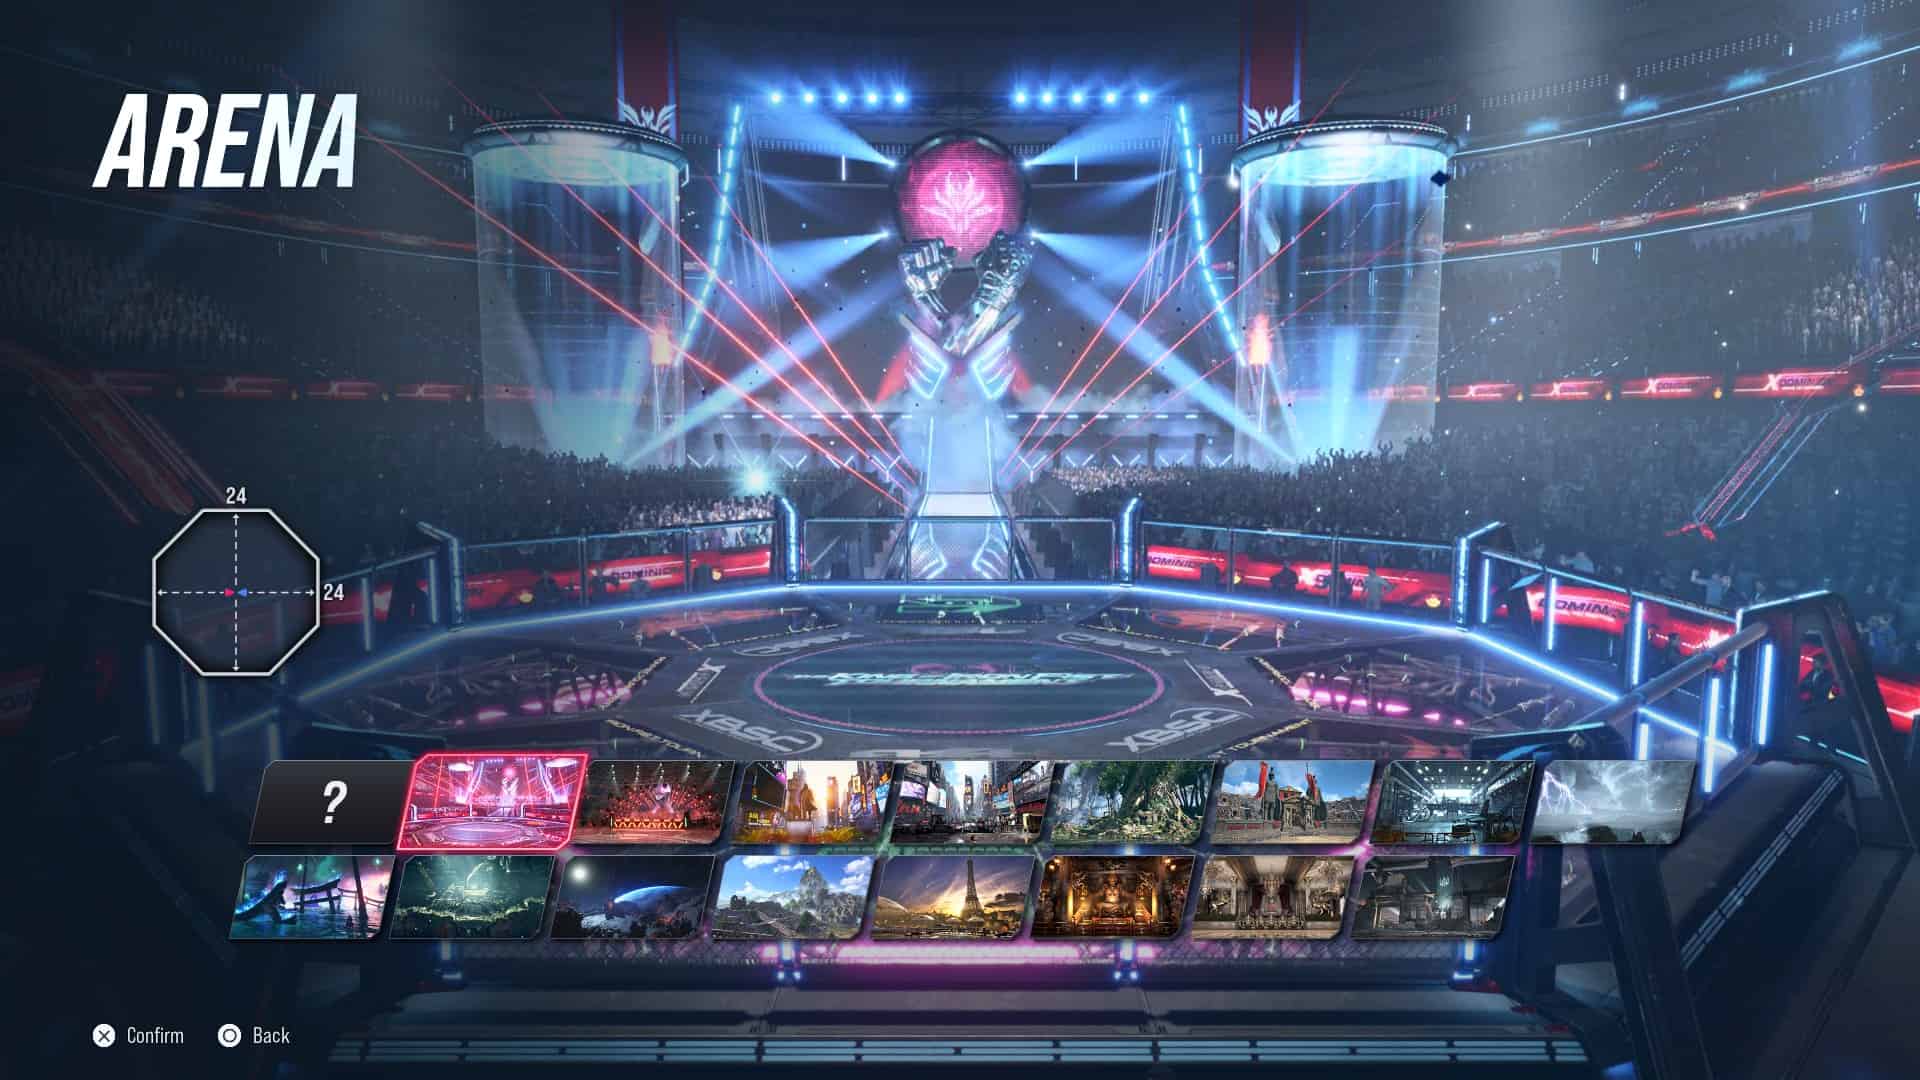 Tekken 8 stages: The Arena stage in the stage select screen